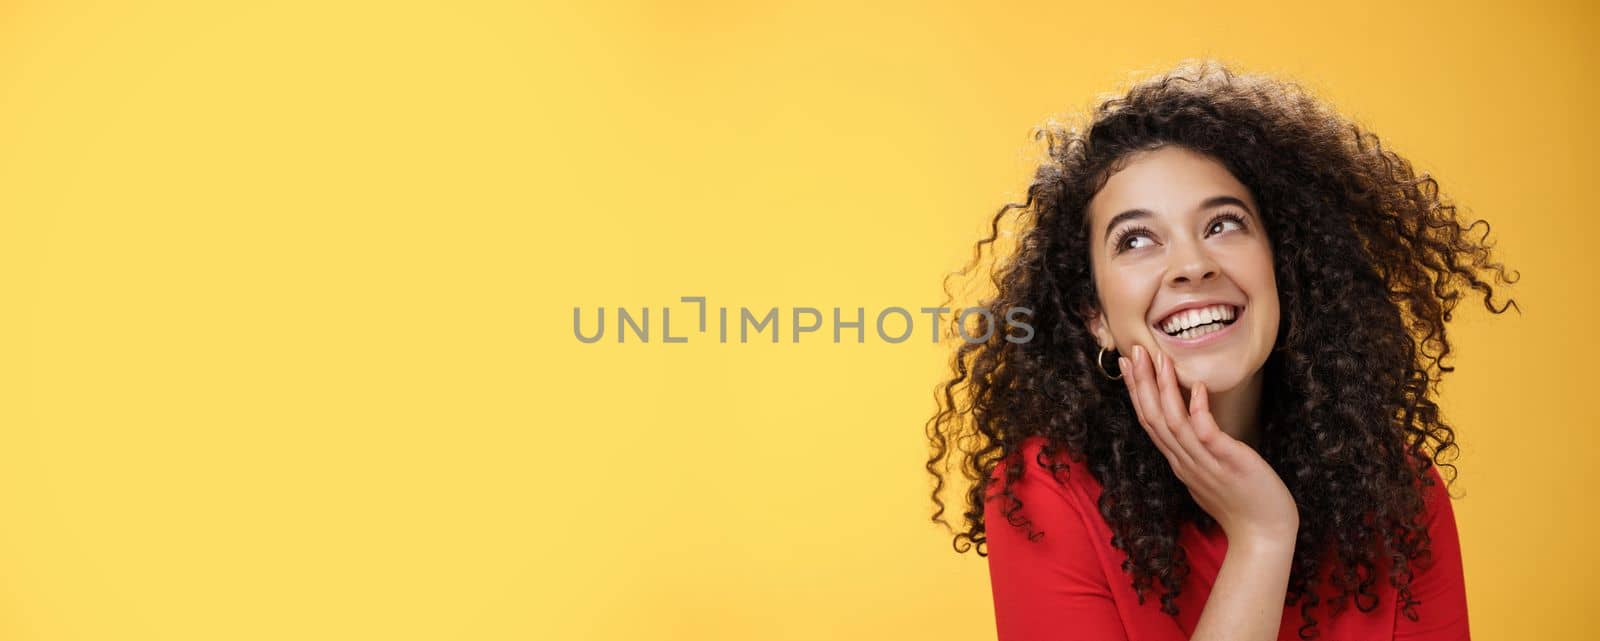 Happy positive pretty young woman with curly hair in red blouse laughing silly and carefree as gazing pleased at upper left corner, touching face, satisfied and delighted over yellow wall.